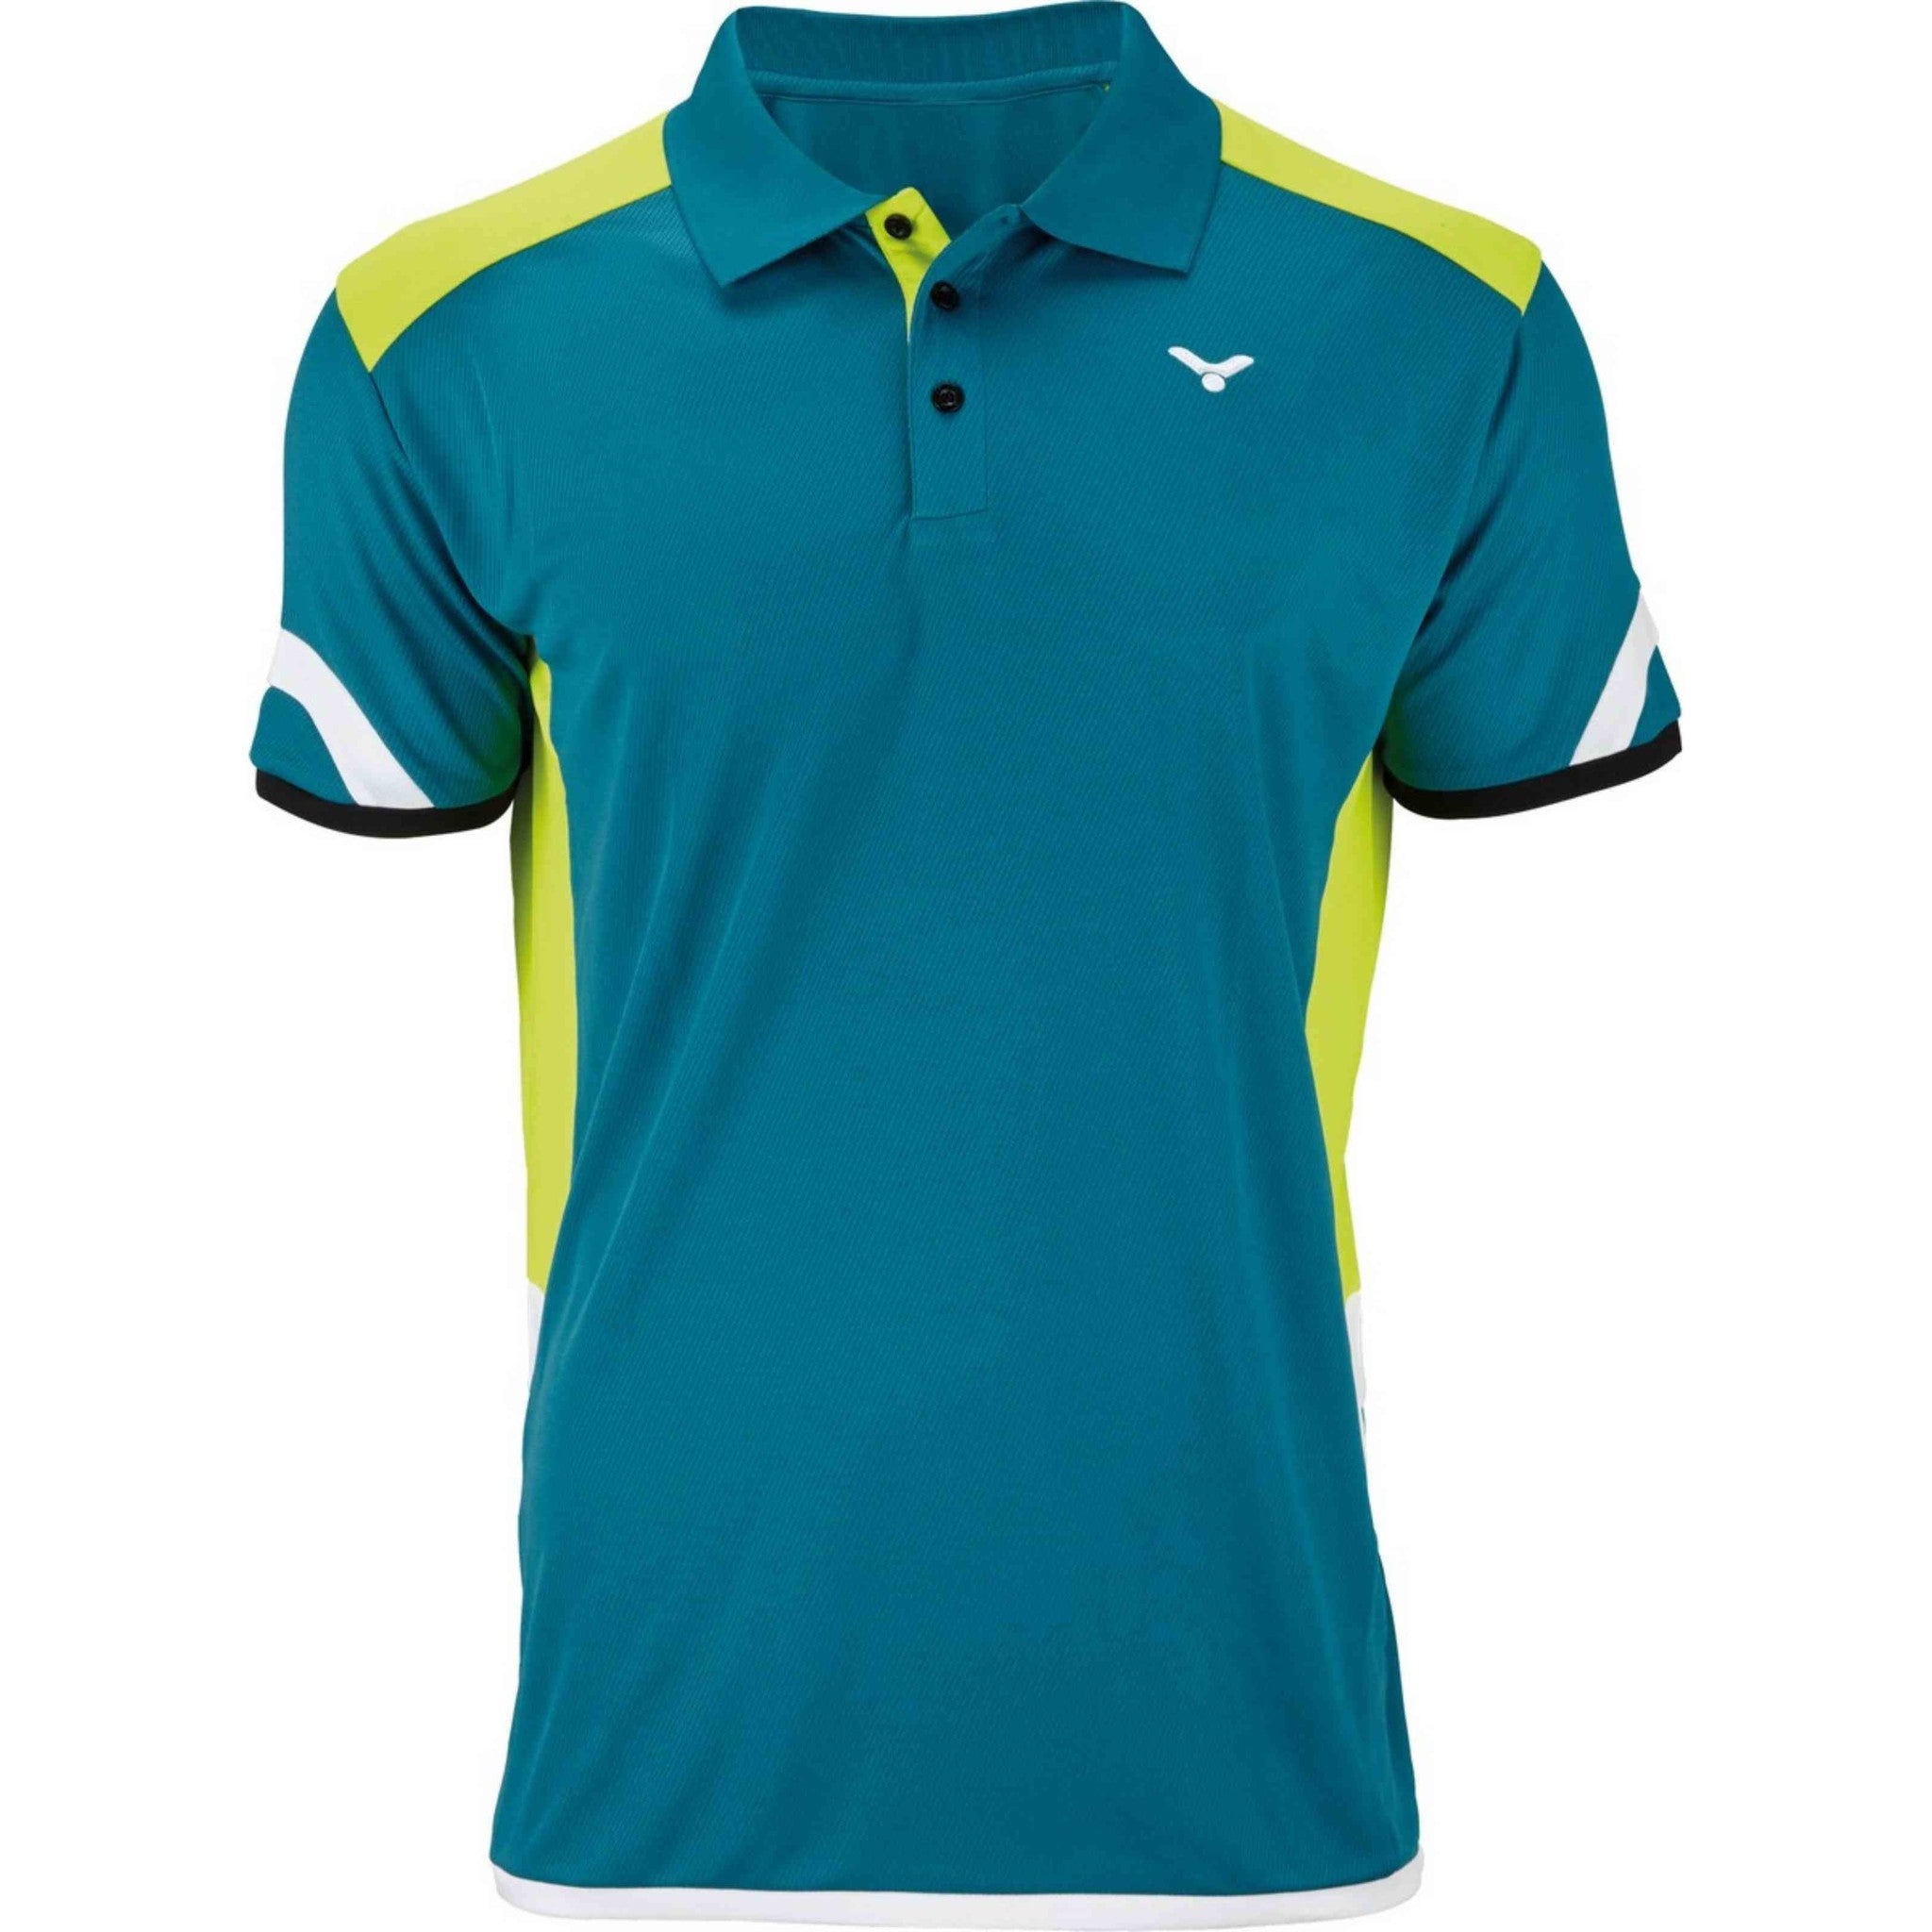 Victor Polo Function Unisex Petrol 6697 - Green